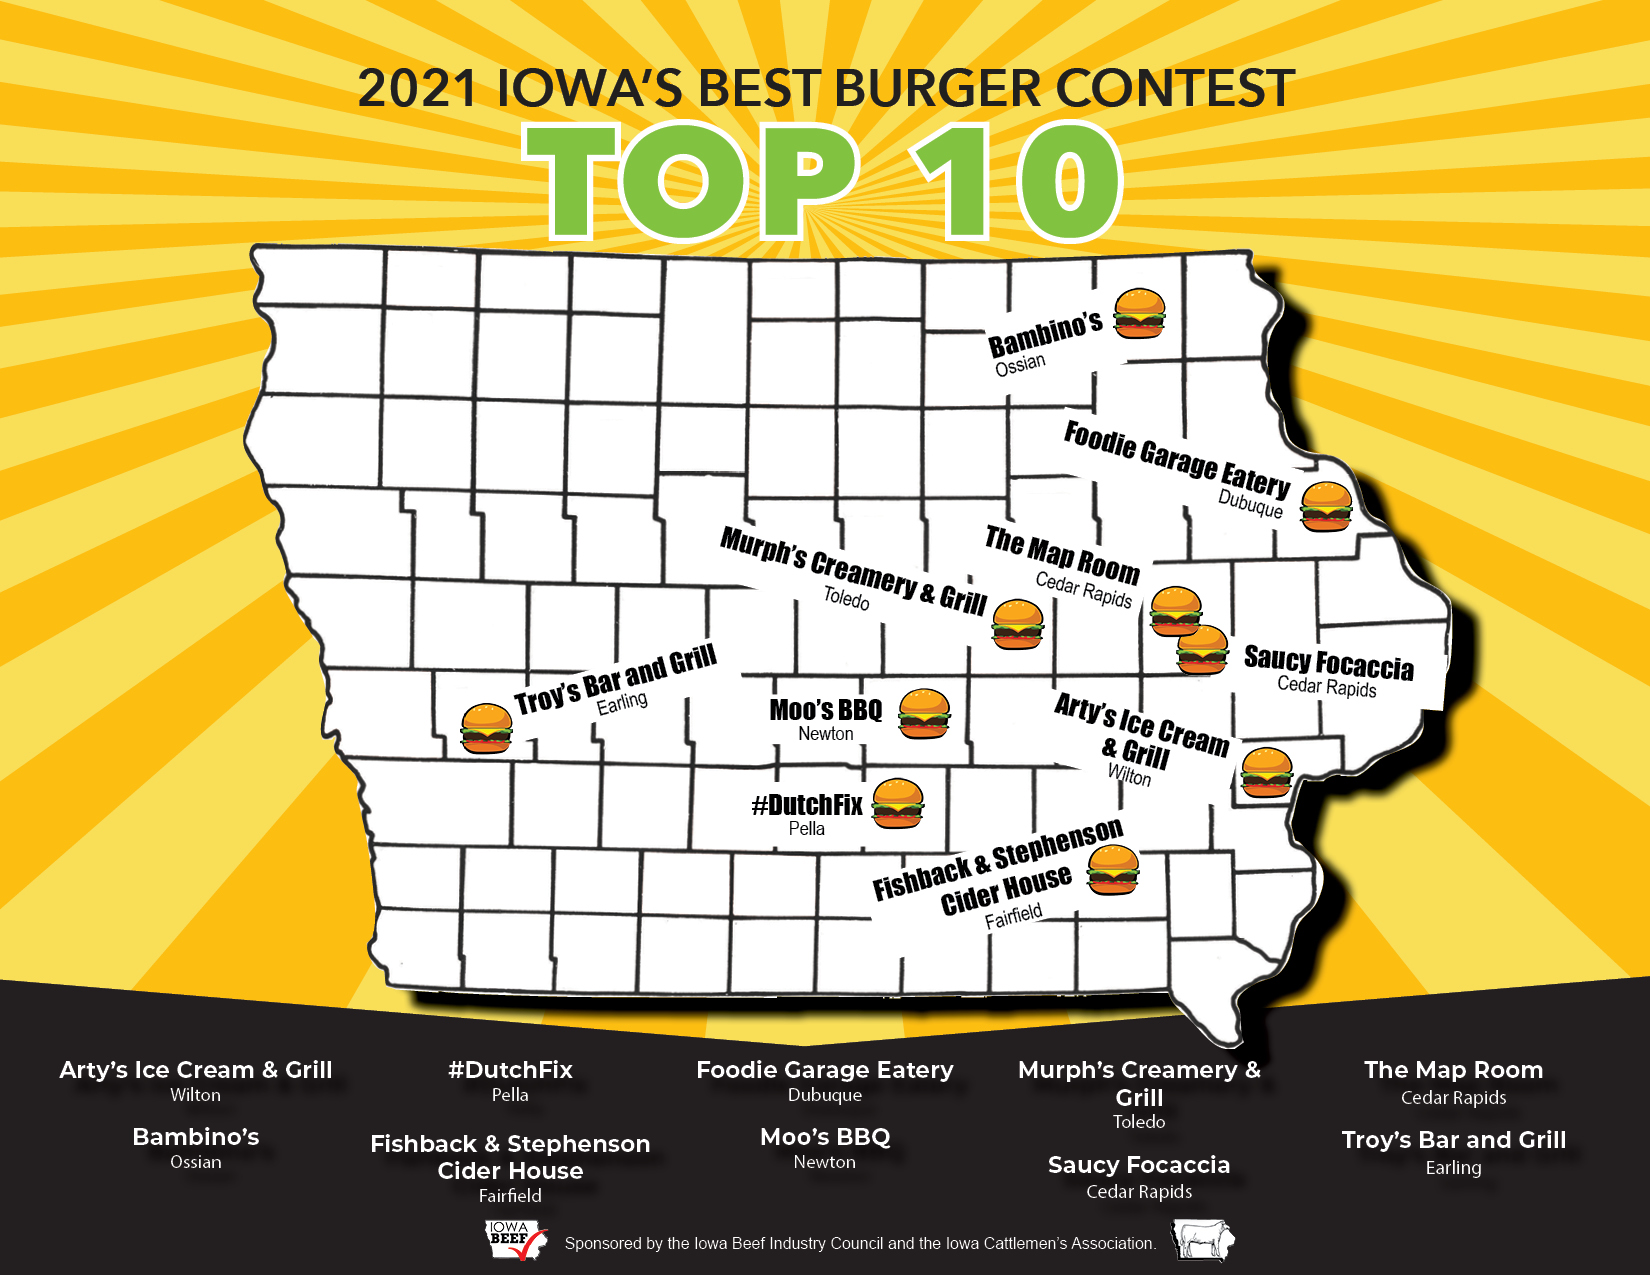 Top 10 Announced for Iowa's Best Burger Contest